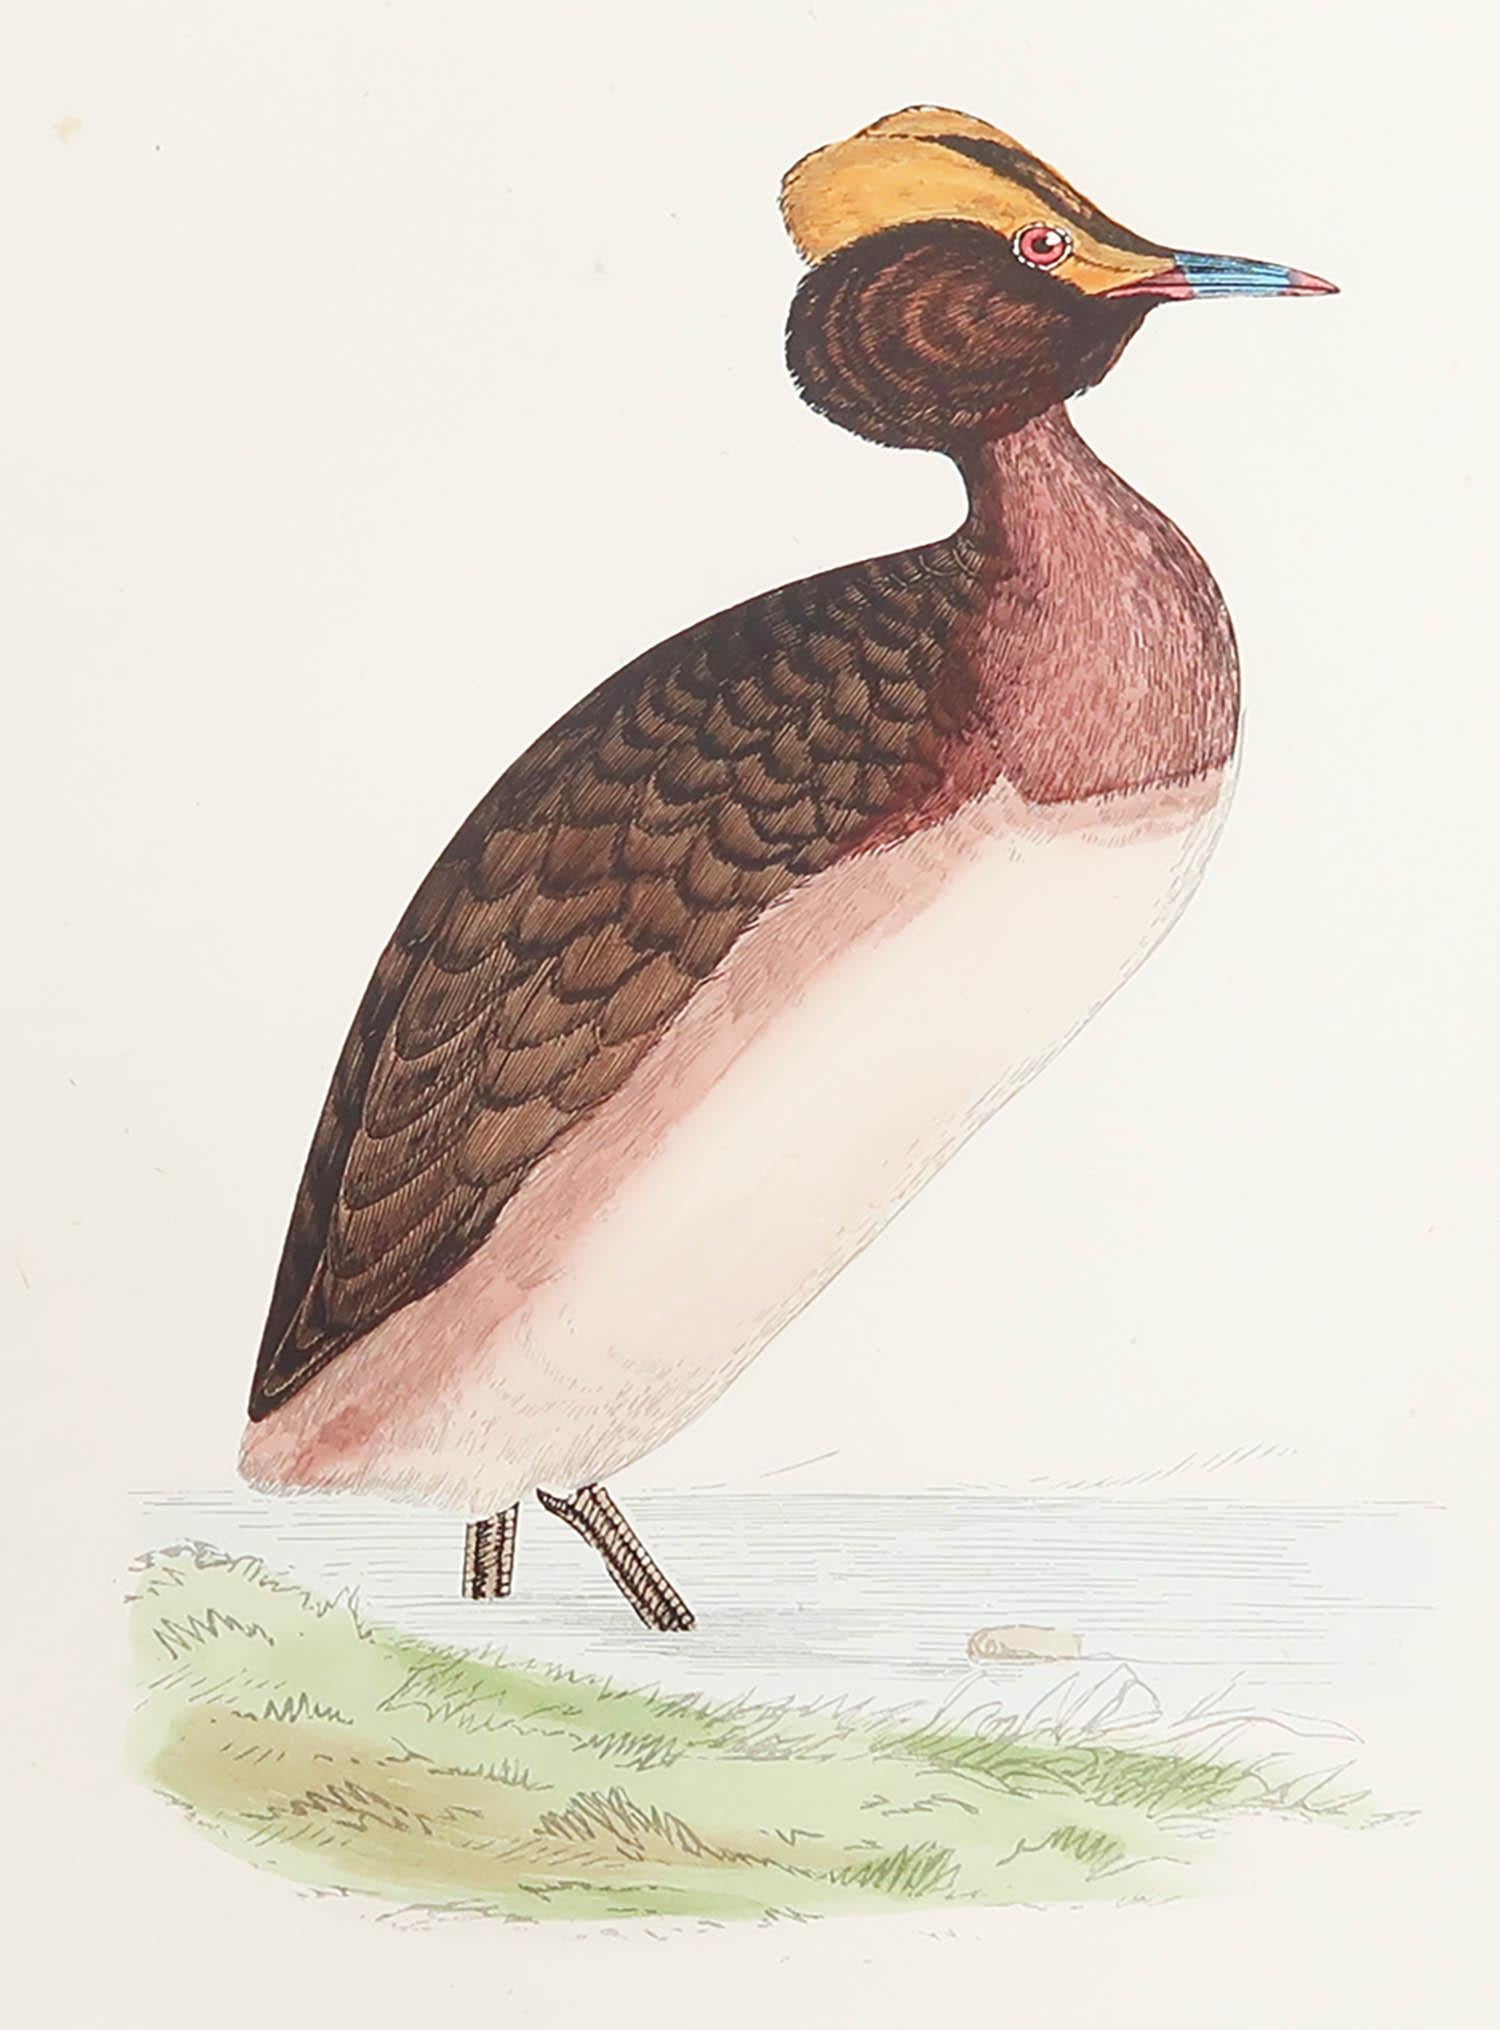 Great image of a Dusky Grebe

Unframed. It gives you the option of perhaps making a set up using your own choice of frames.

Lithograph after Alexander Francis Lydon.

Original color

Published, circa 1880

Free shipping.




